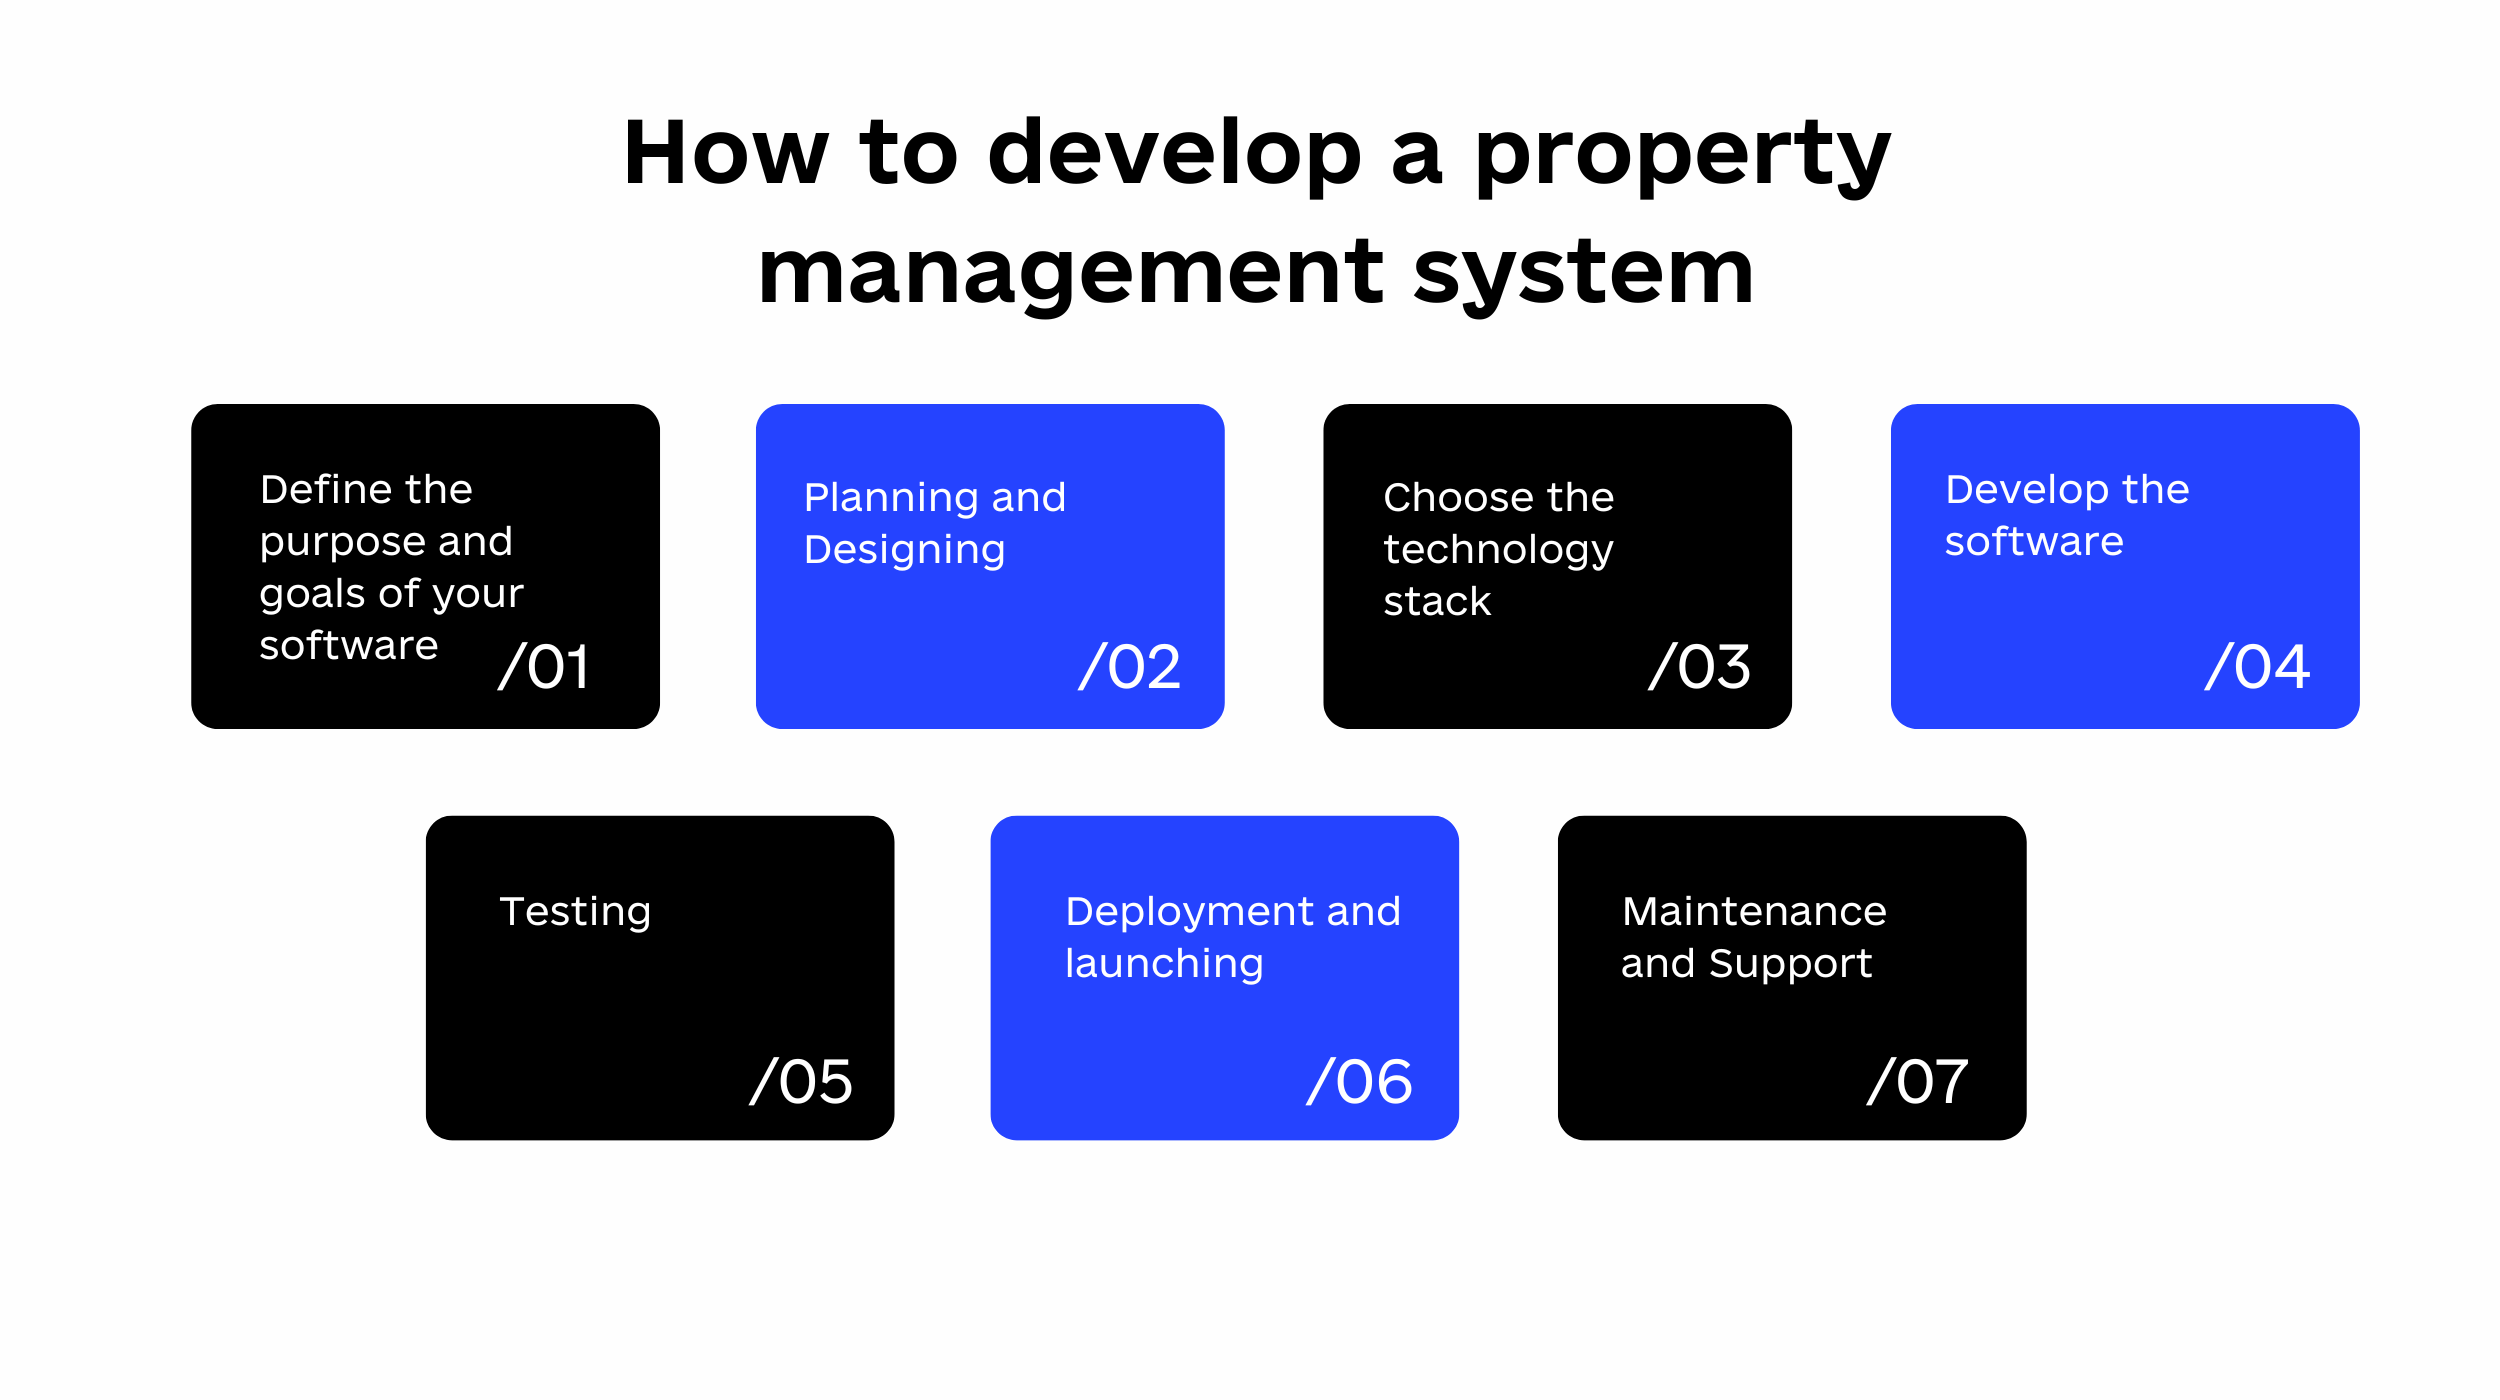 How to develop a property management system